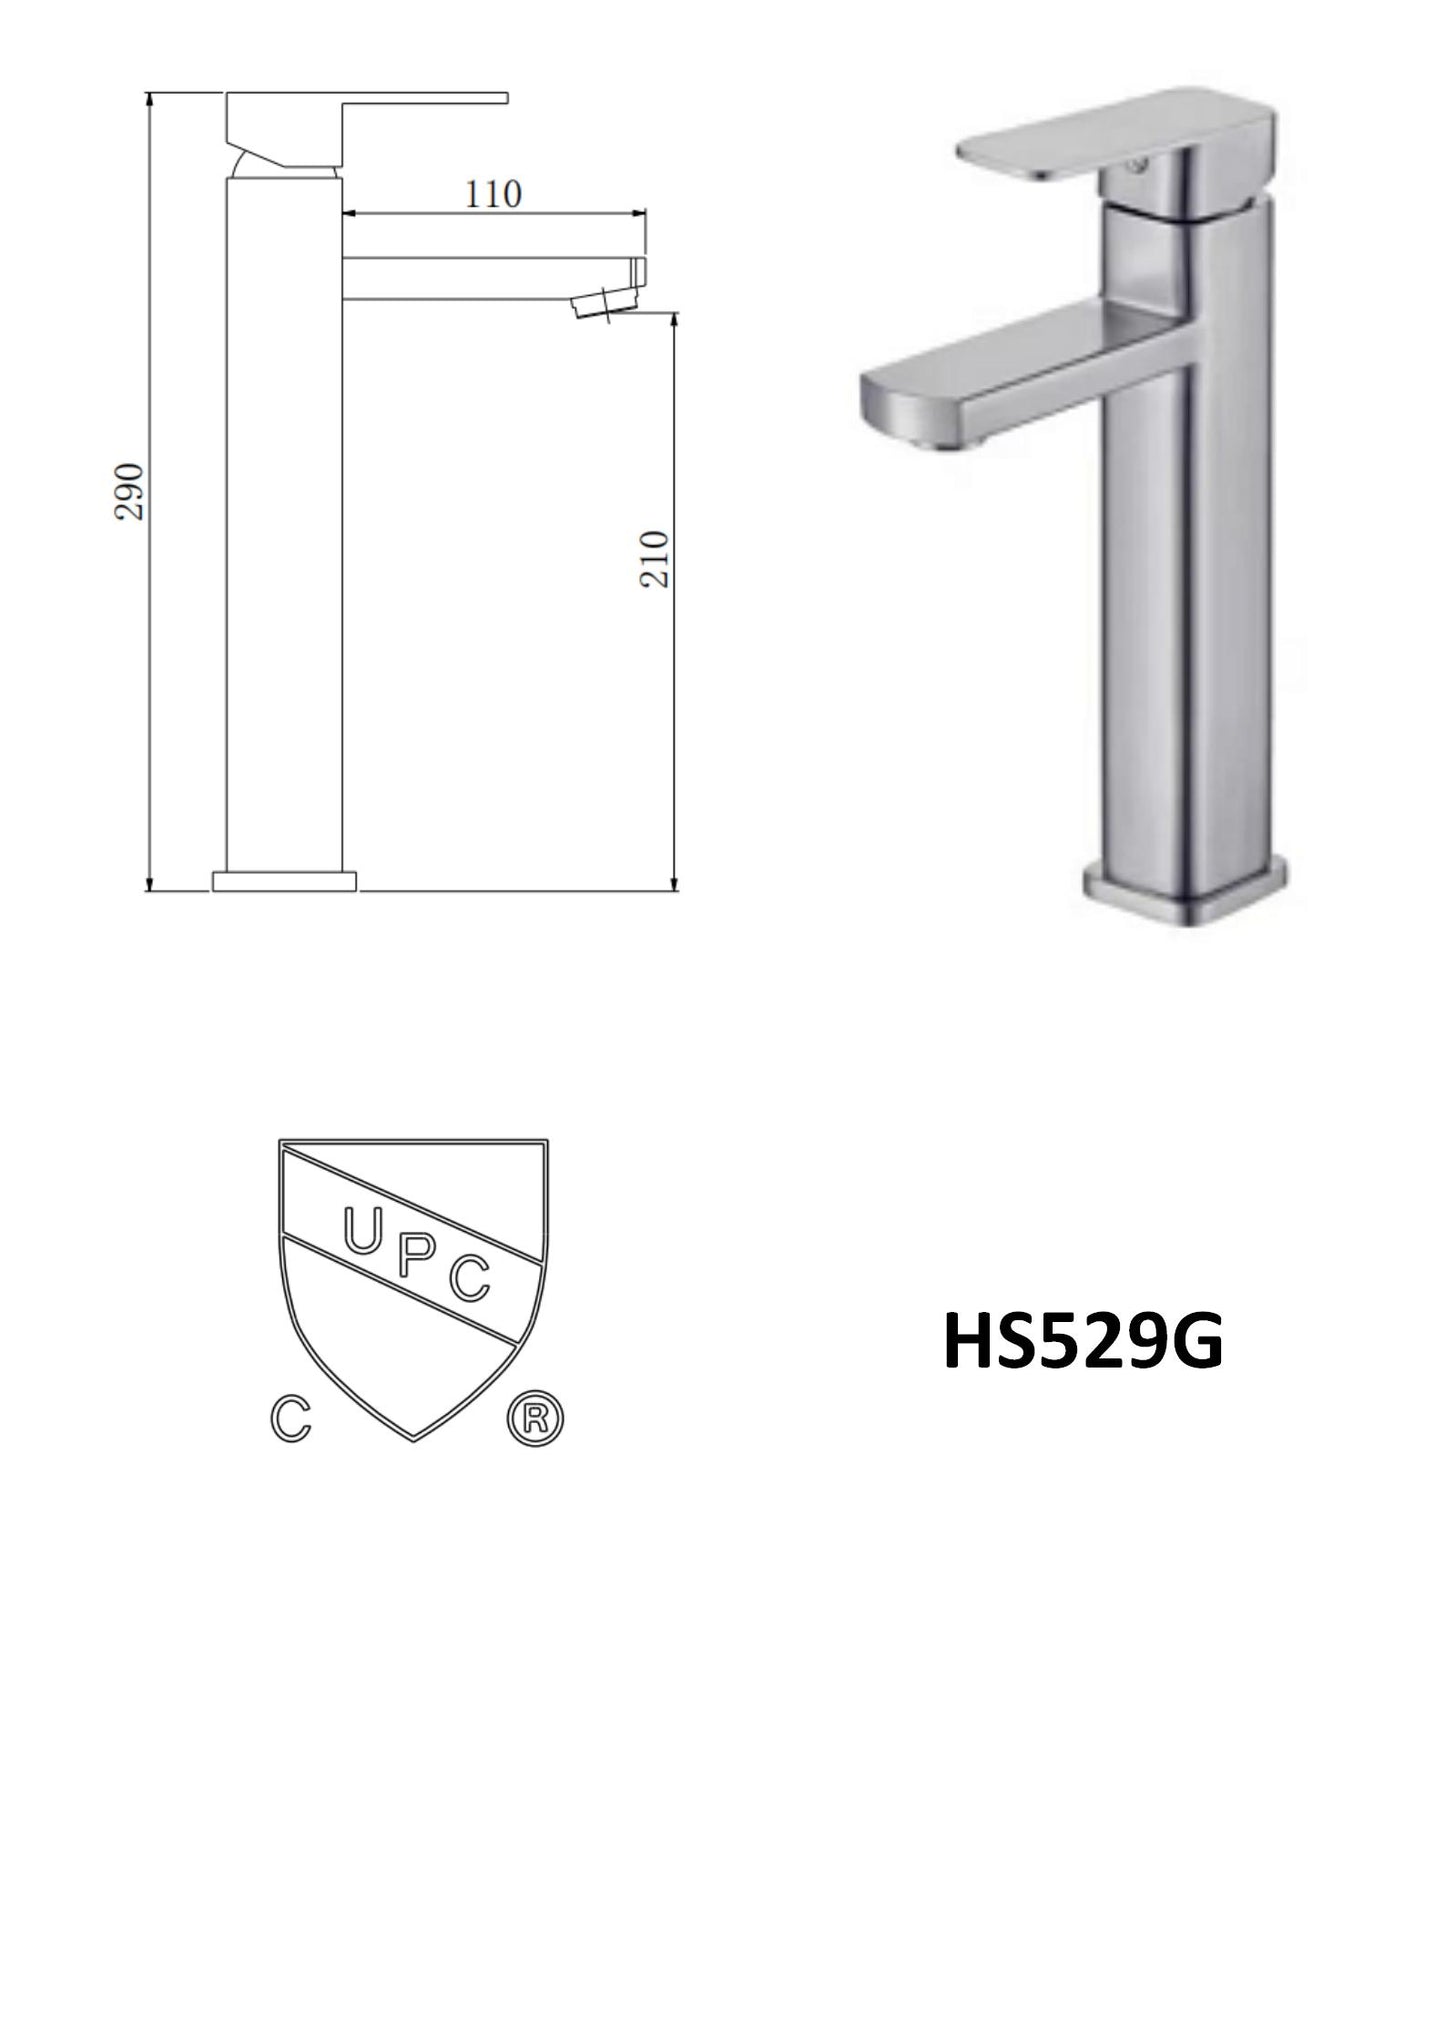 HSA259G chrome square tall bathroom faucet stainless steel $59/pc VIP 10Years/10pcs+ $55/pc